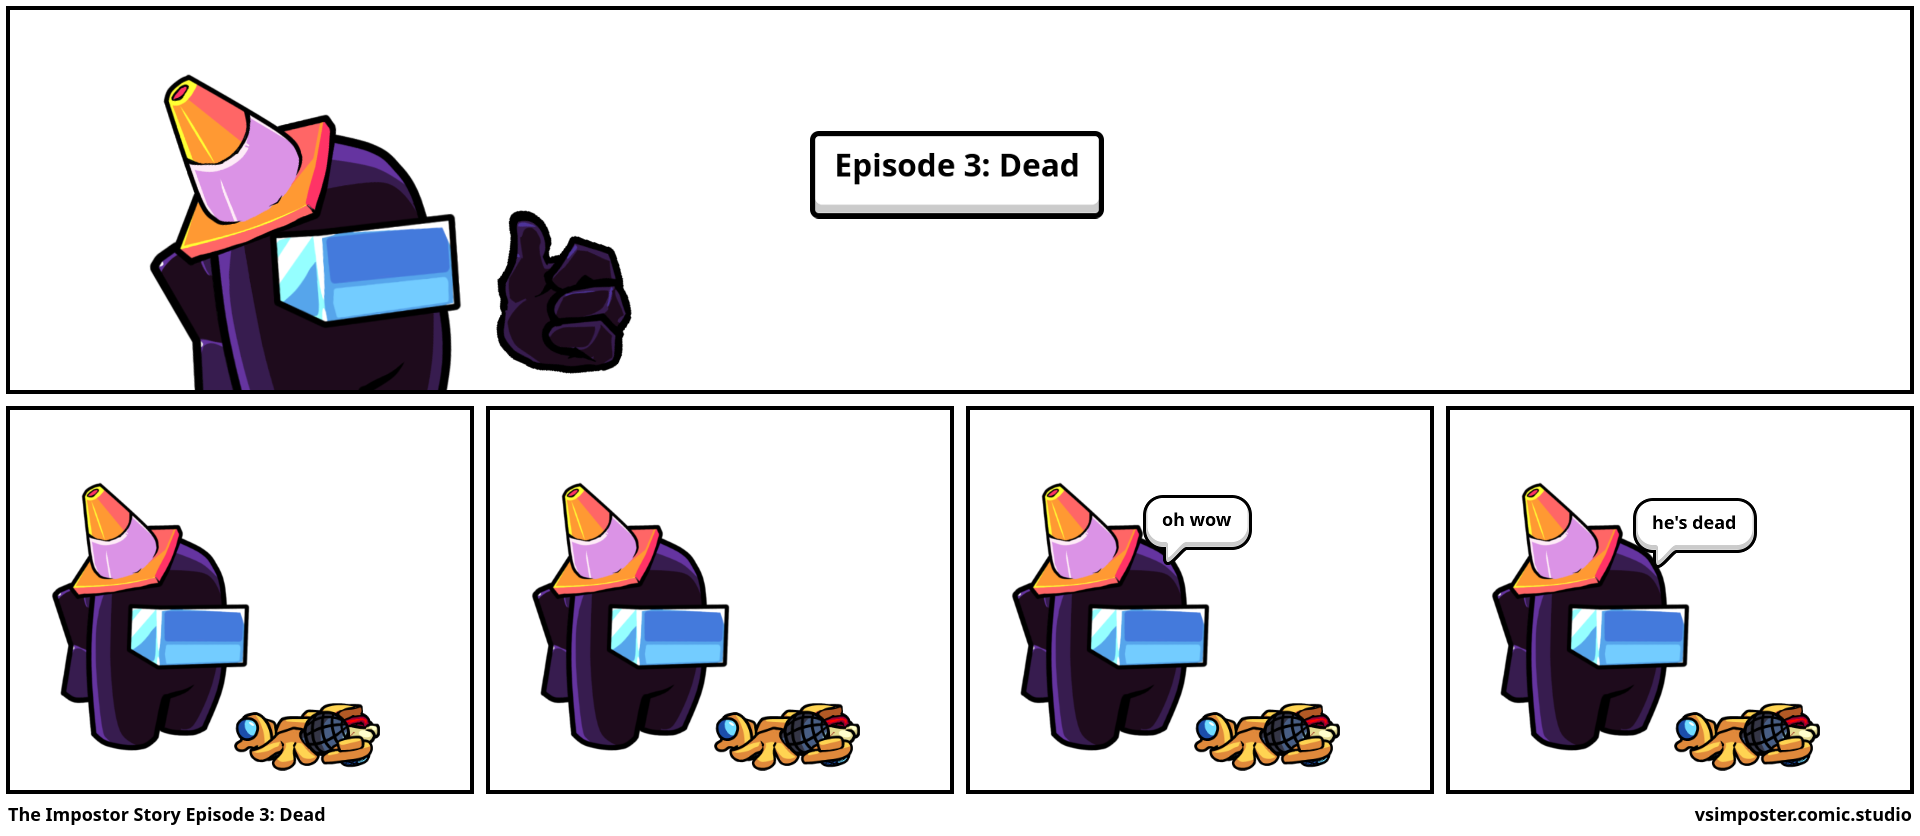 The Impostor Story Episode 3: Dead